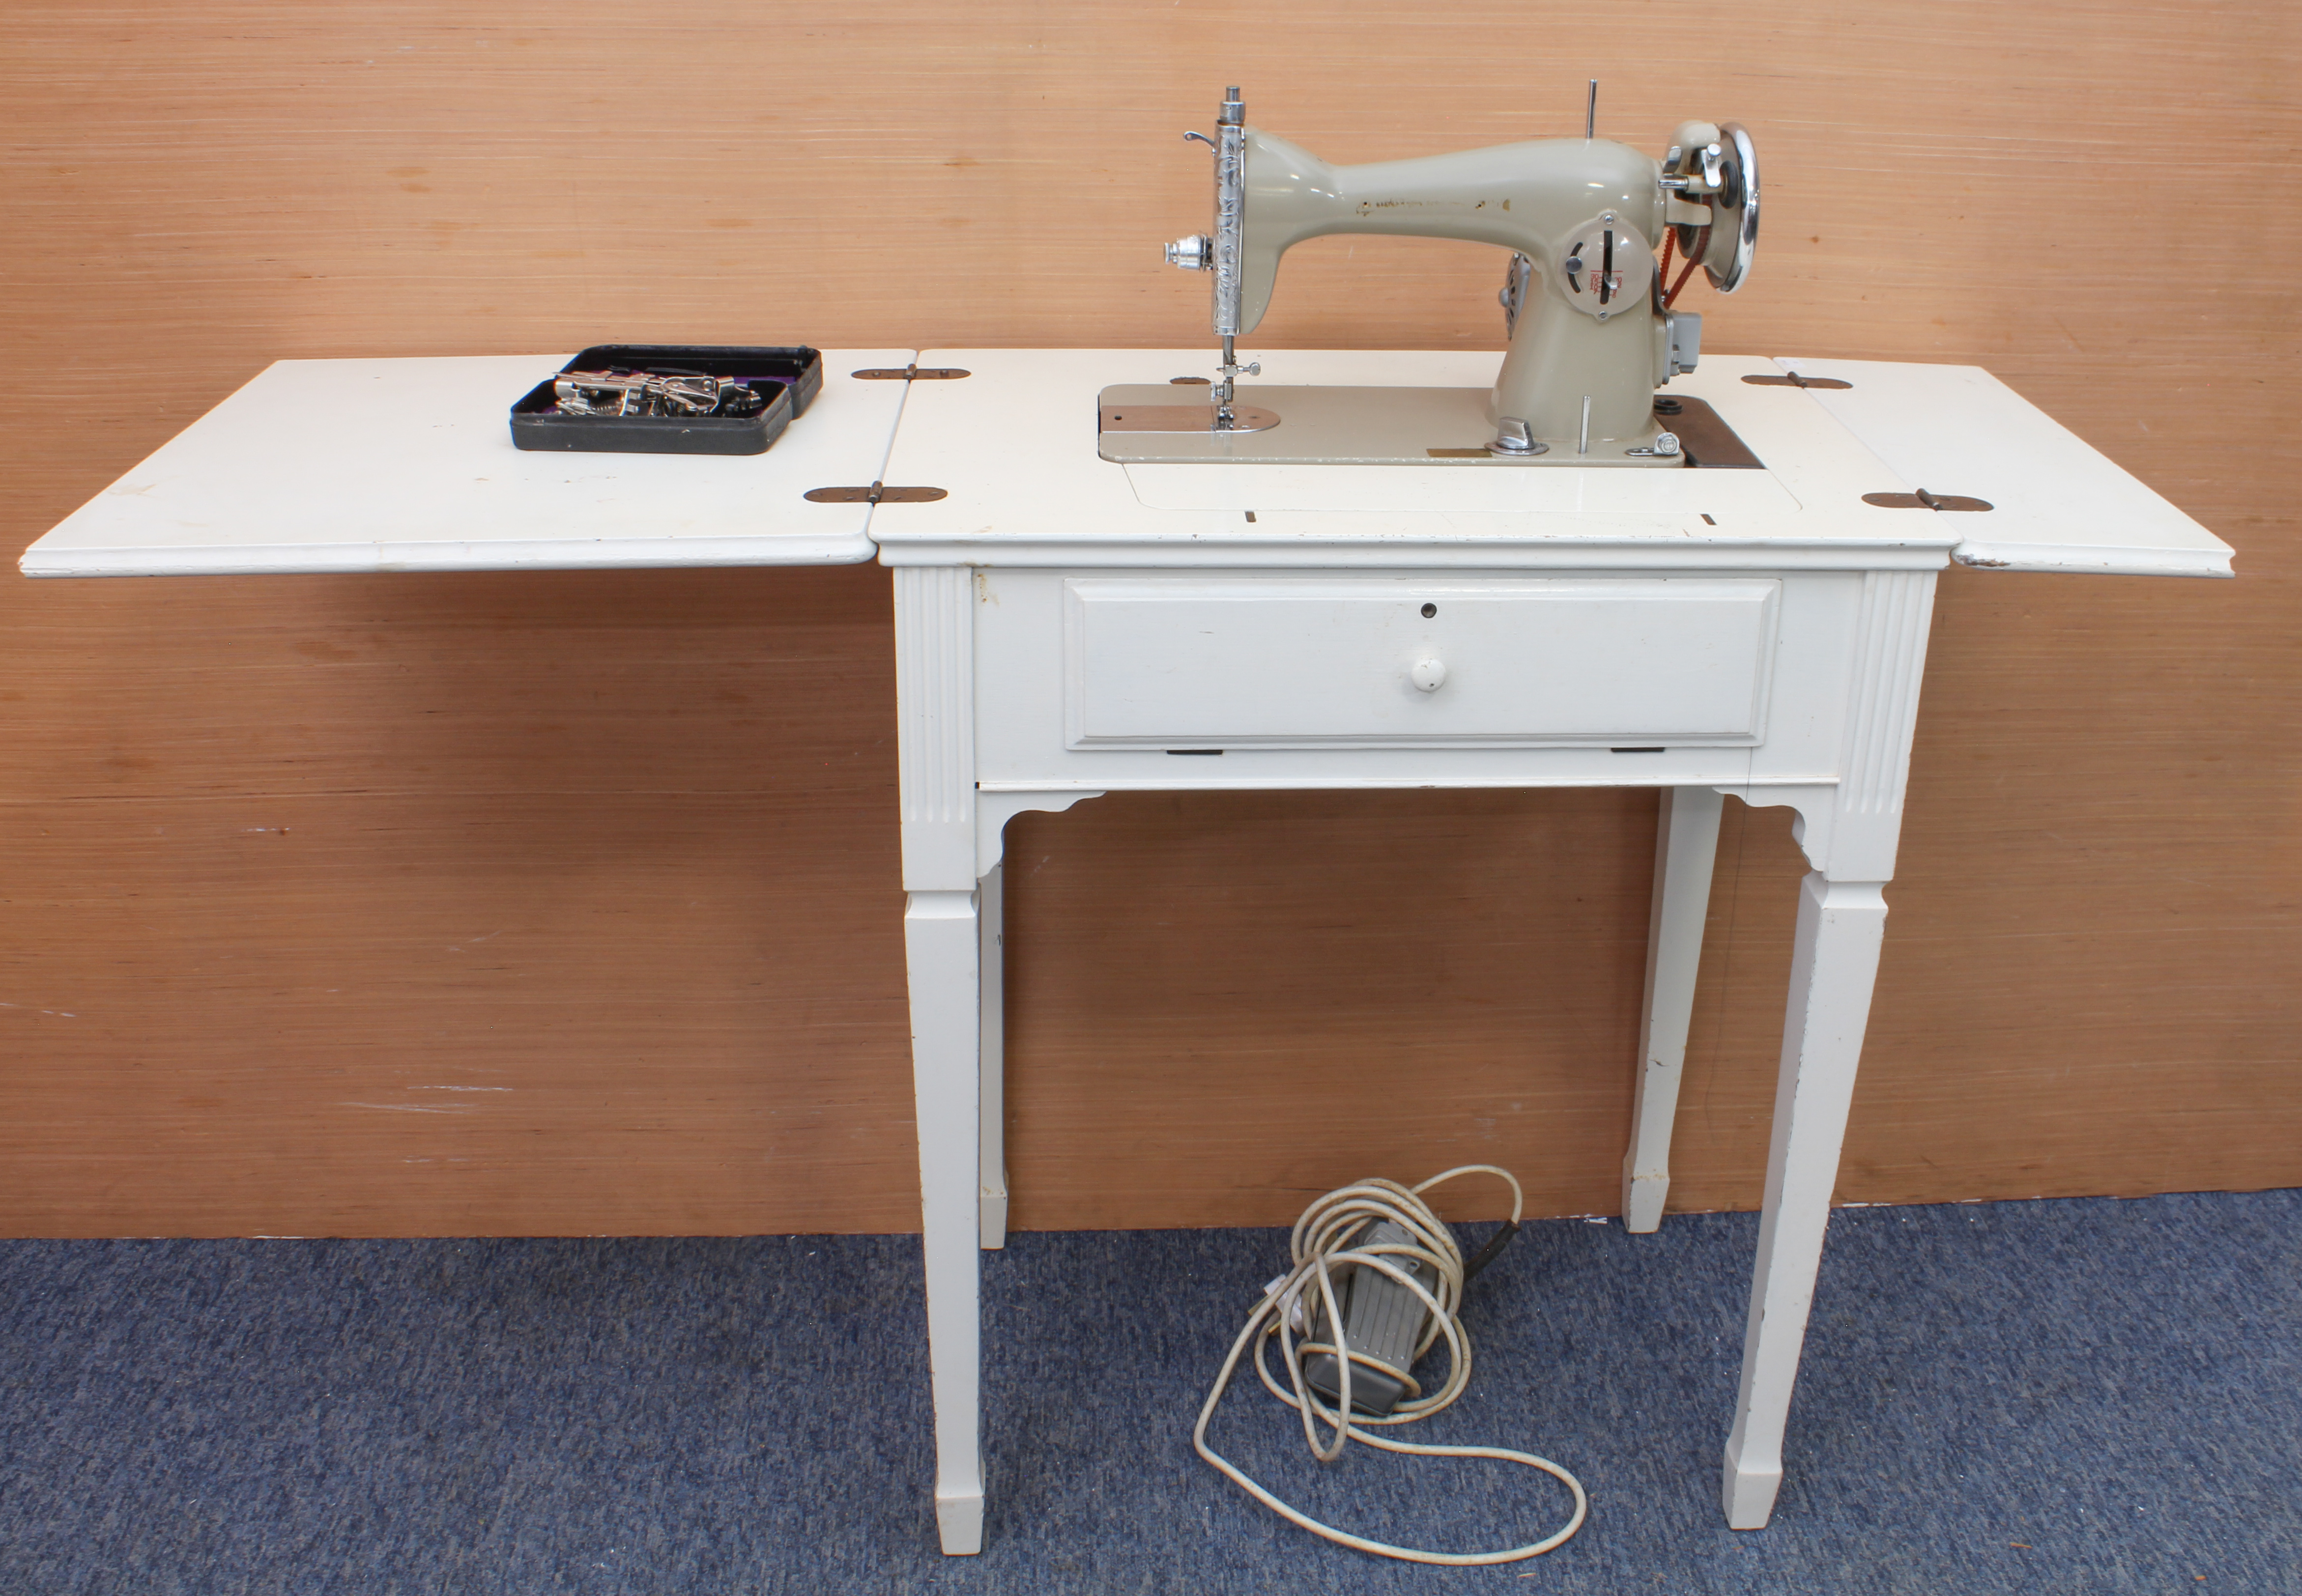 A vintage 1950s-60s sewing machine, probably by Nelco - with YM-40 motor and YN-40 Foot